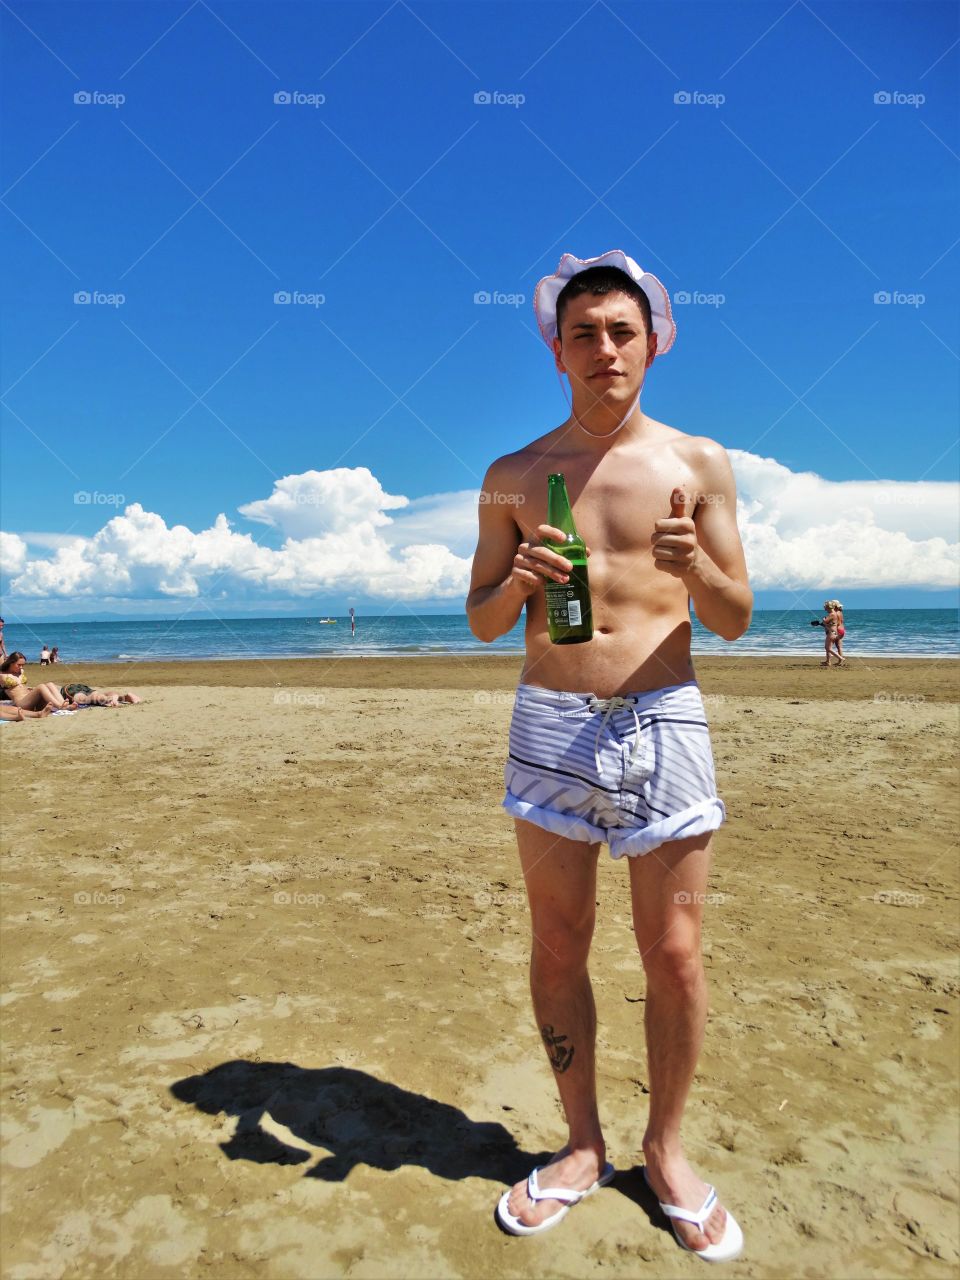 My brother at the beach. It's fu